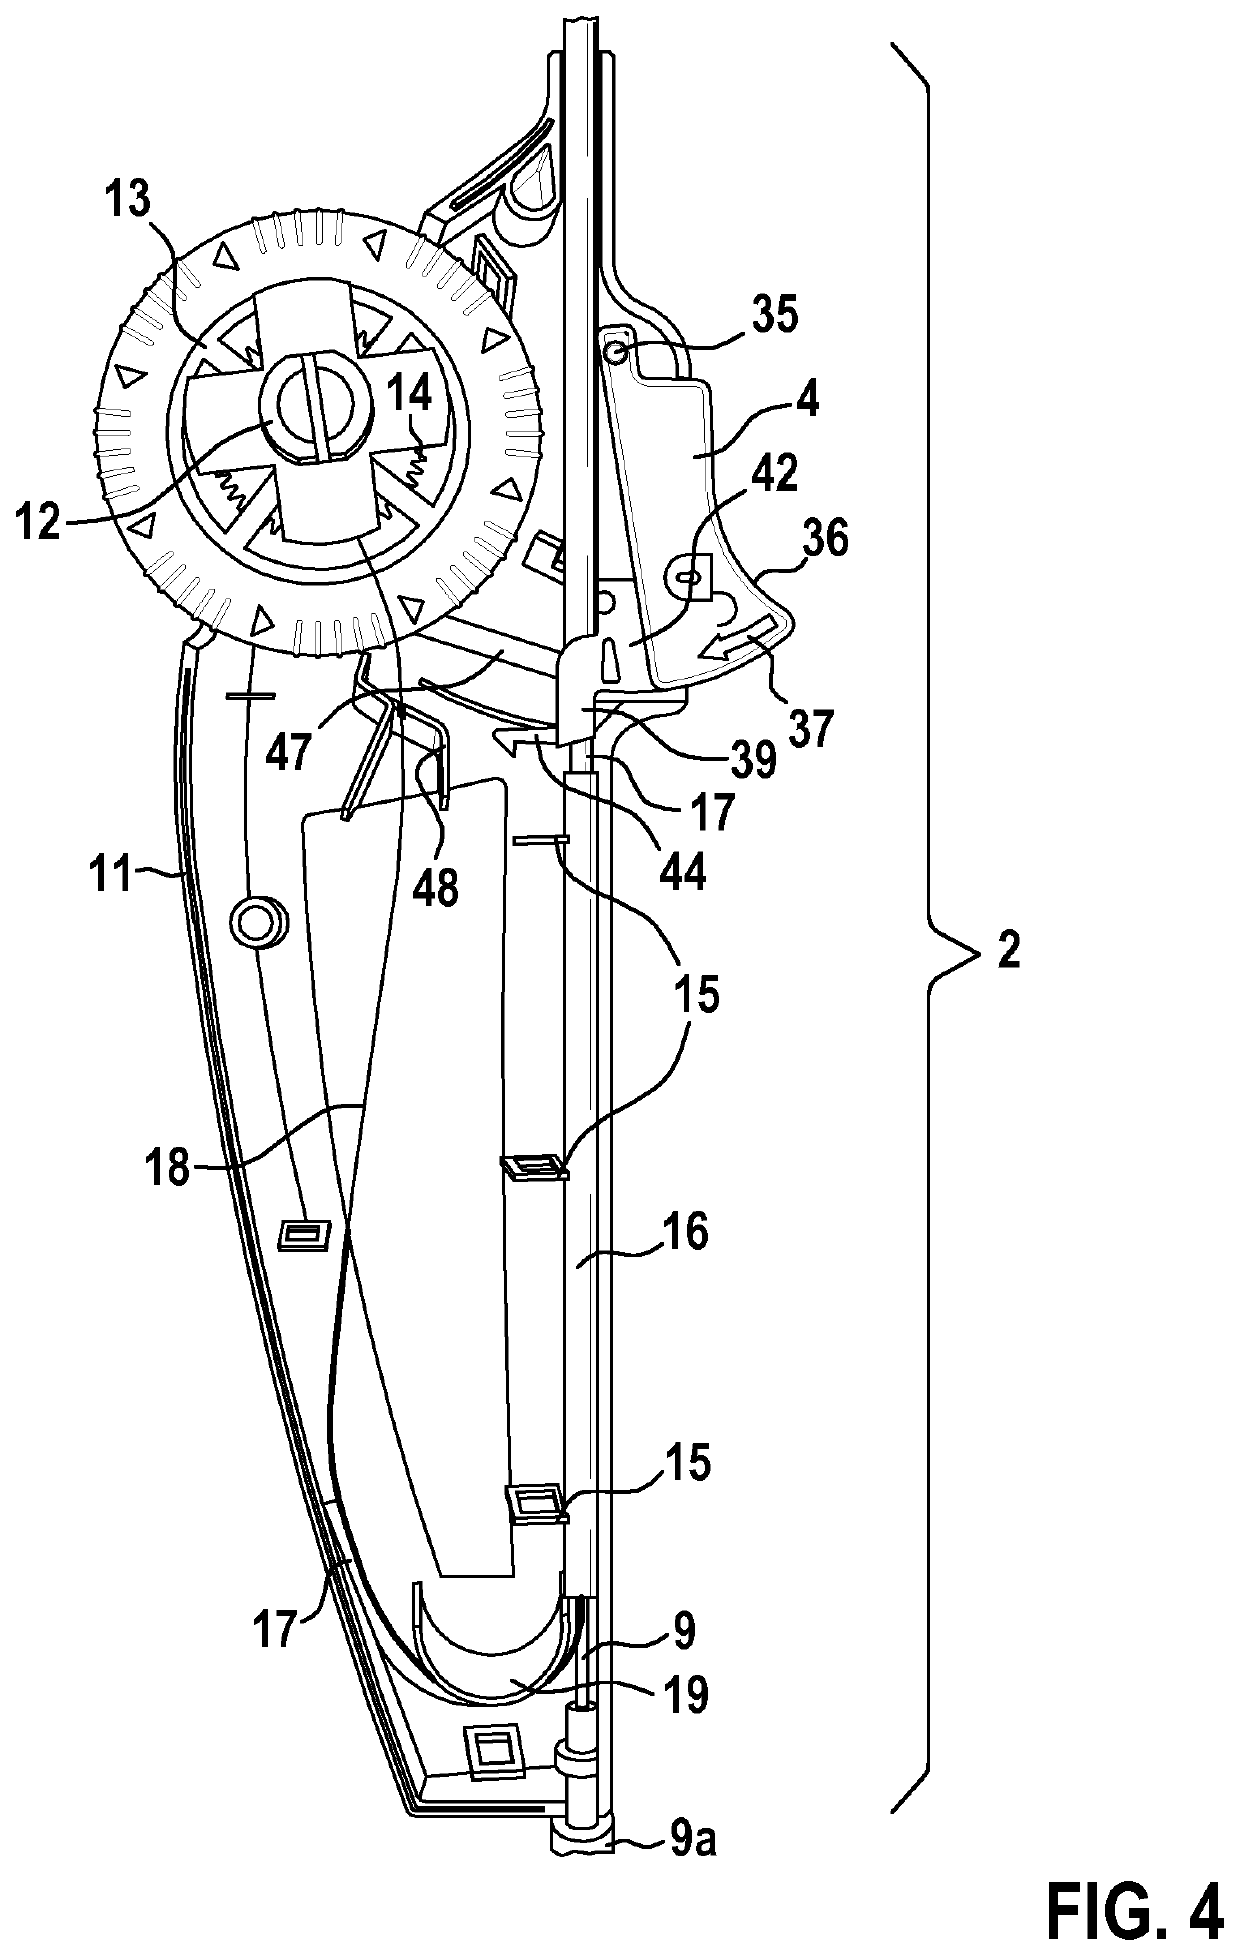 Handle for a catheter and corresonding catheter